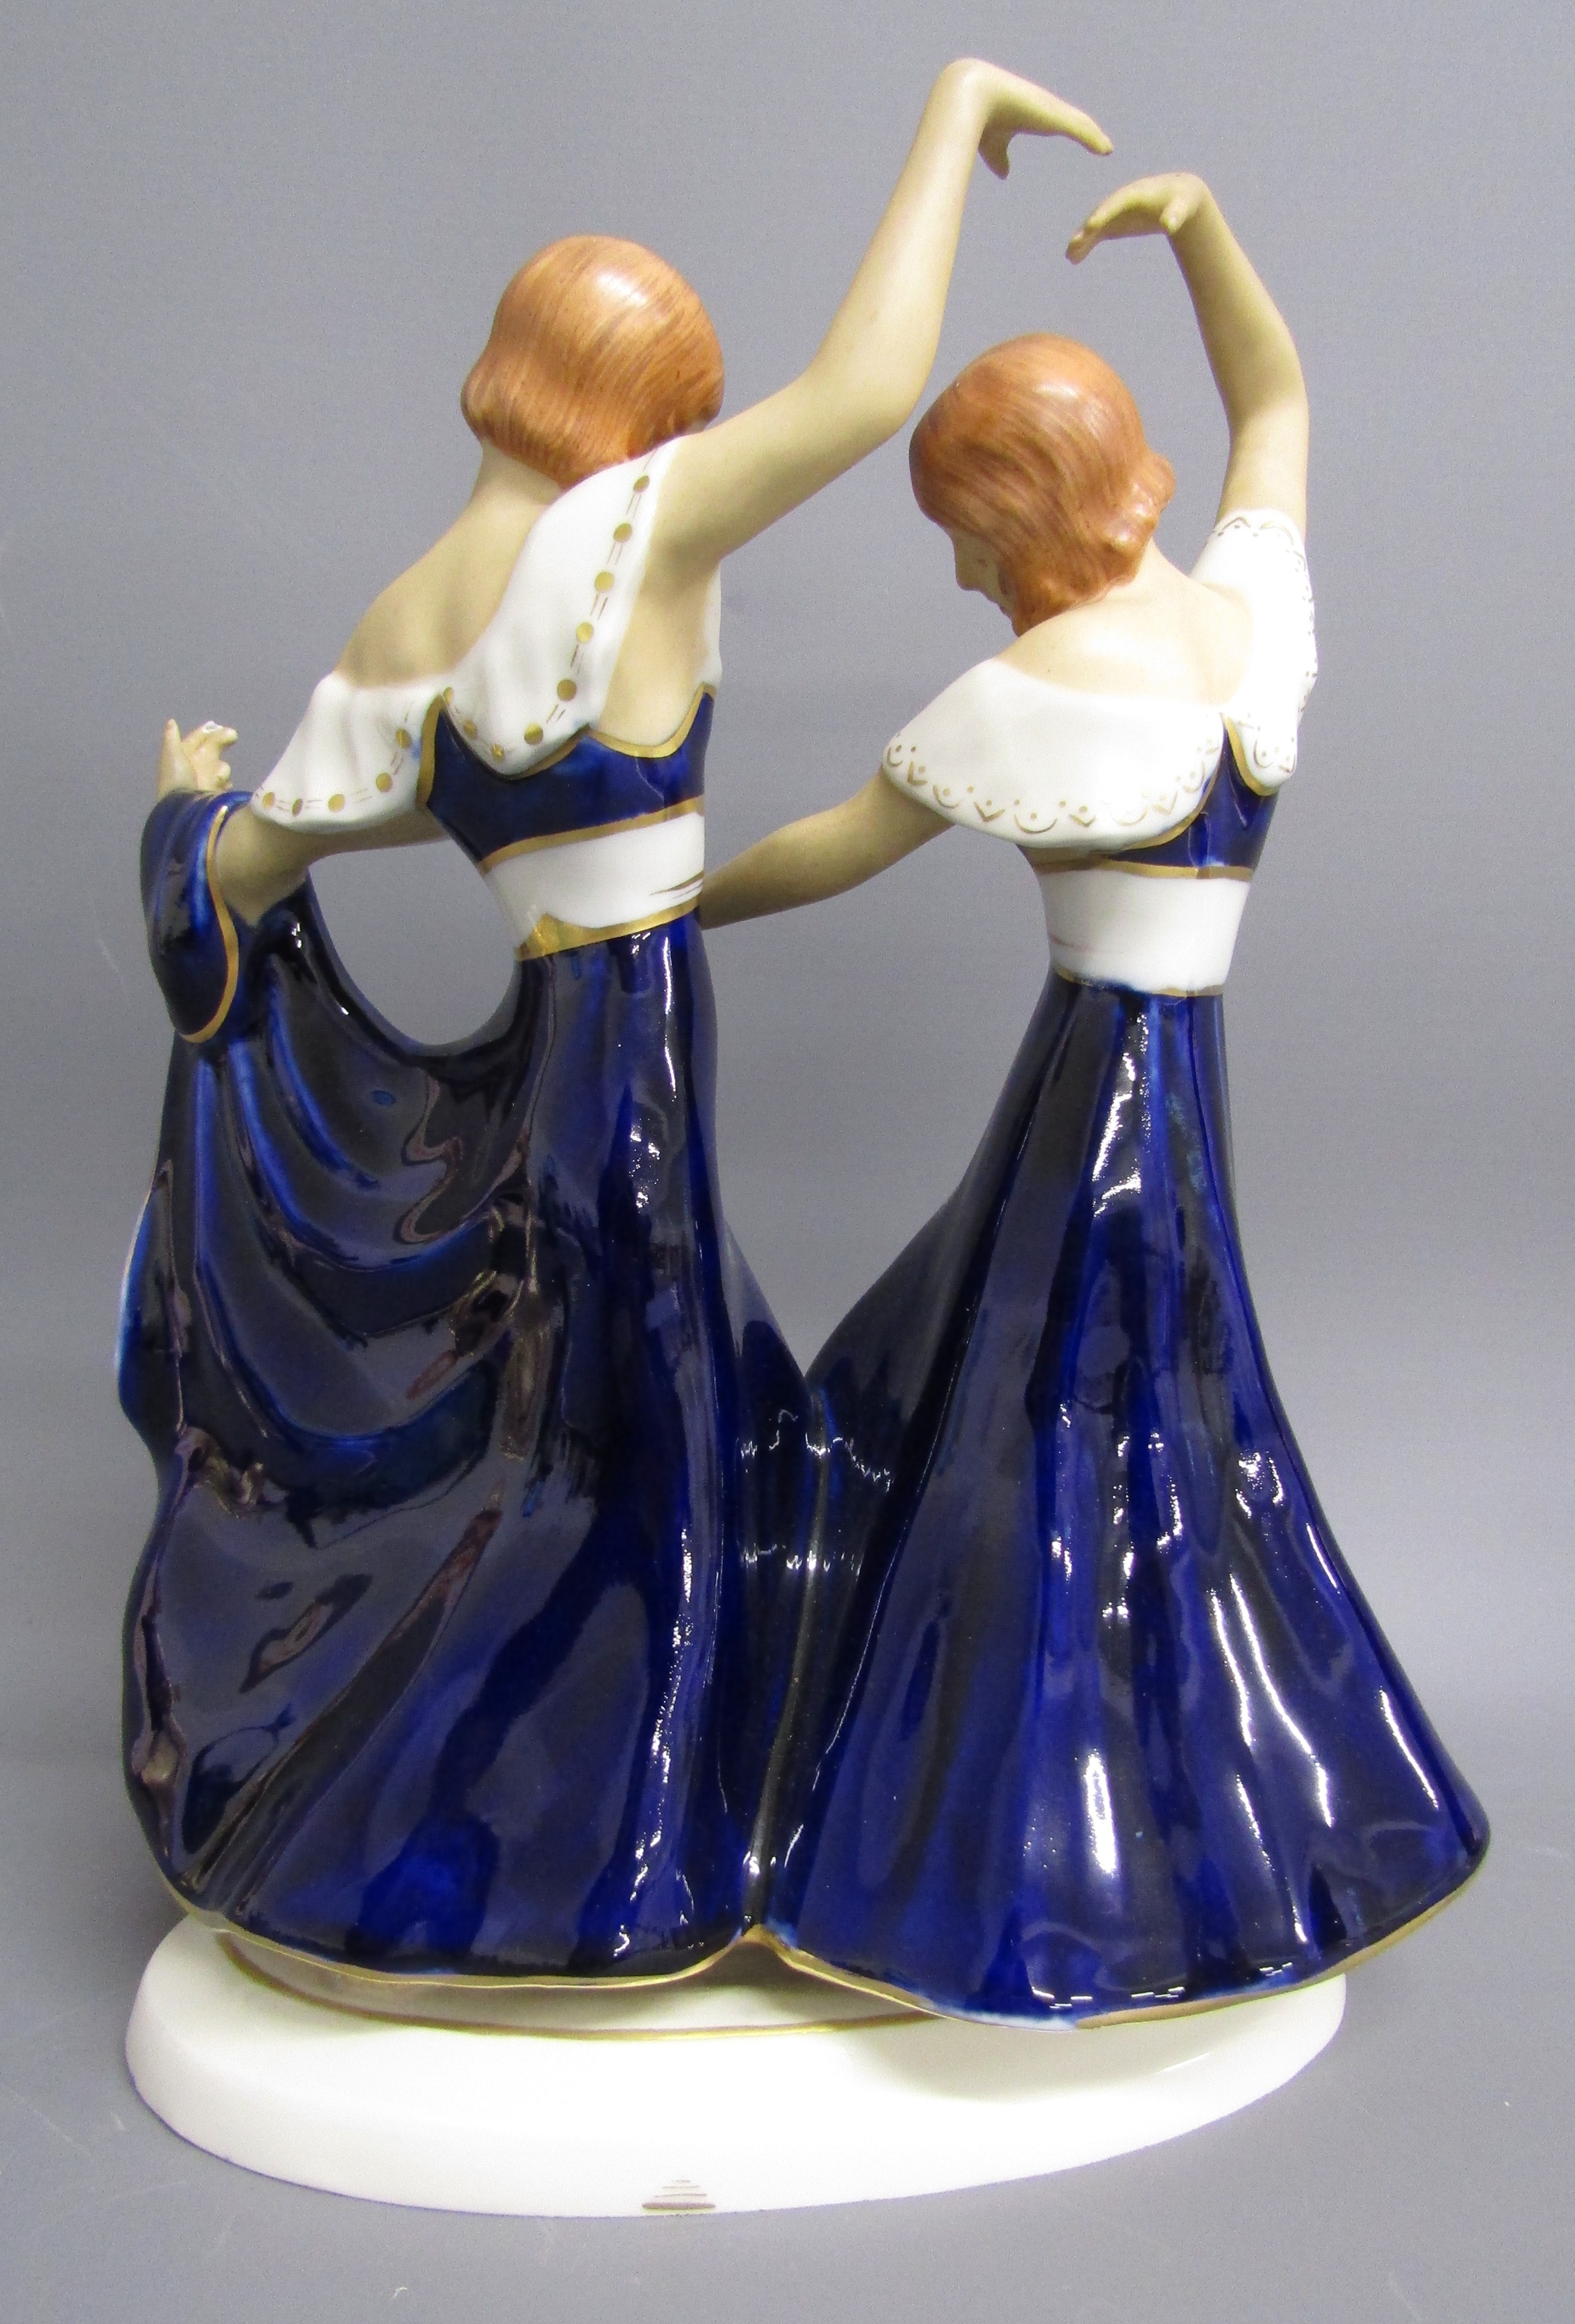 Possibly Royal Dux Elly Strobach Konig dancing sisters figurine (missing fingers to one figure) - Image 3 of 8